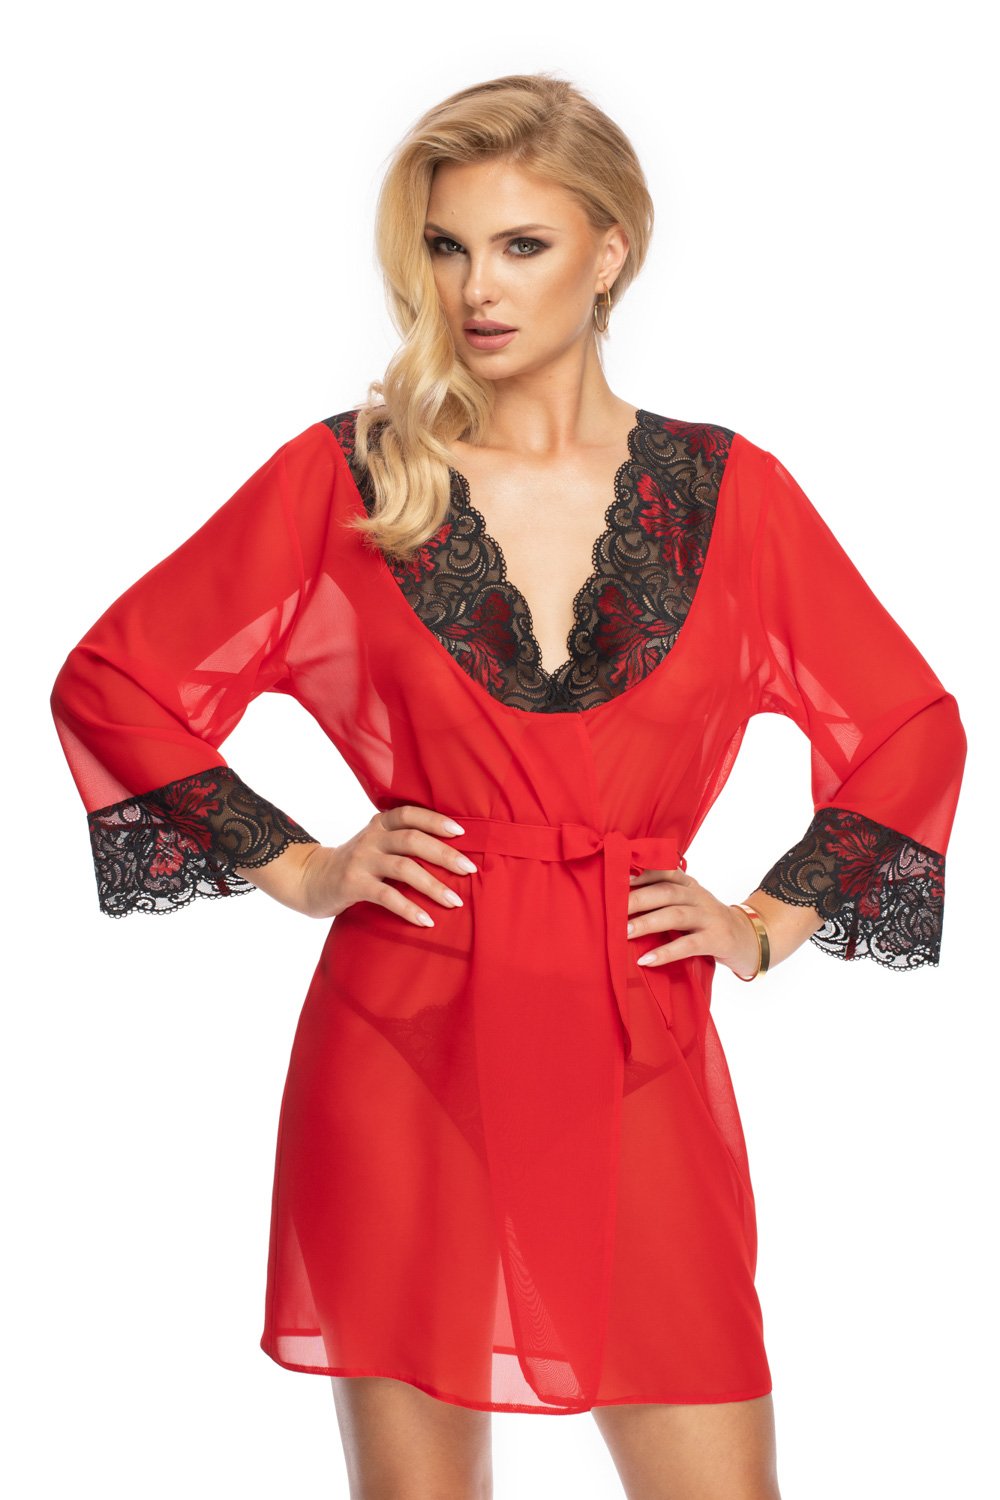 Irall Oriana Red Dressing Gown